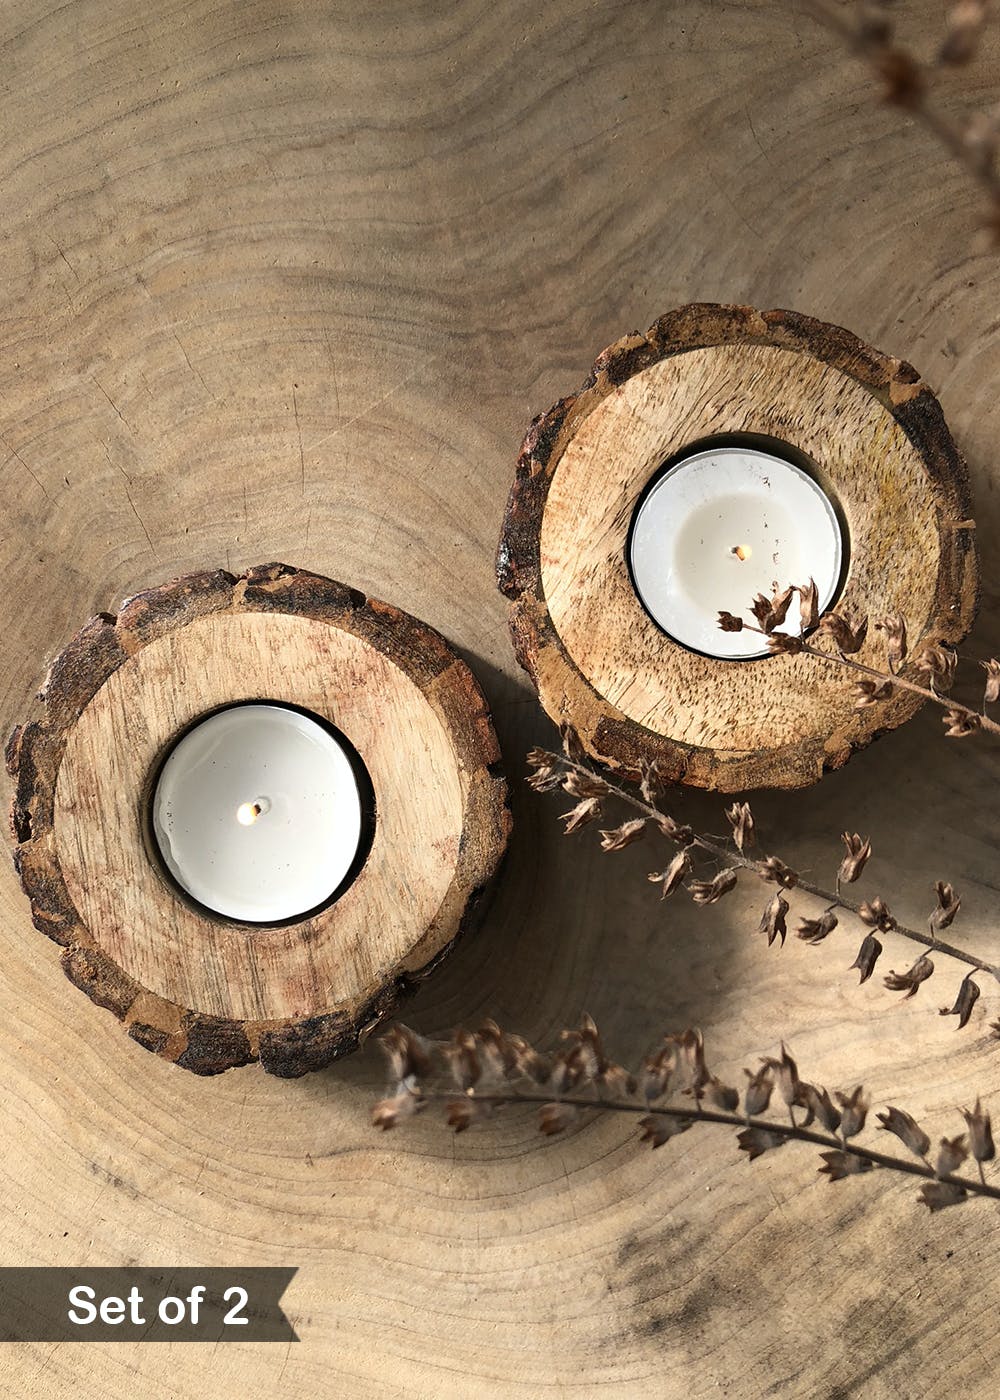 Rustic Charm Tealight Candle - Burn time - 2 -3 Hours - Set of 2